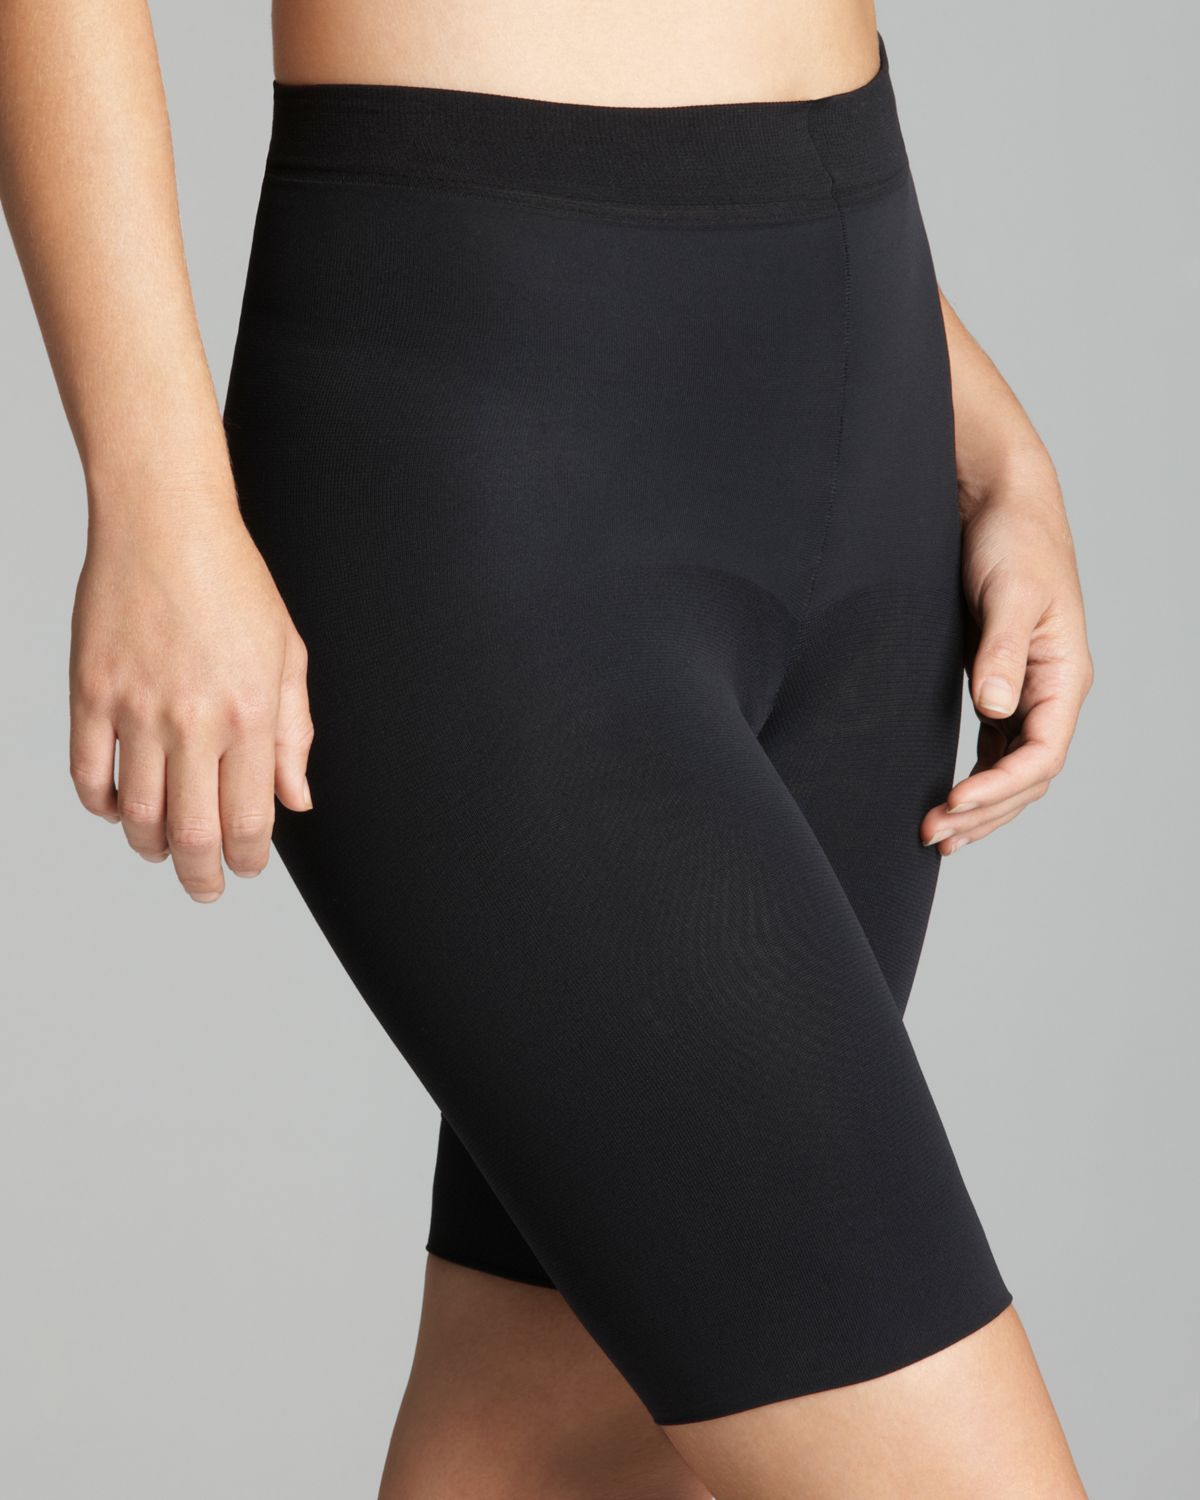 Spanx In-Power Line Super Power Panty